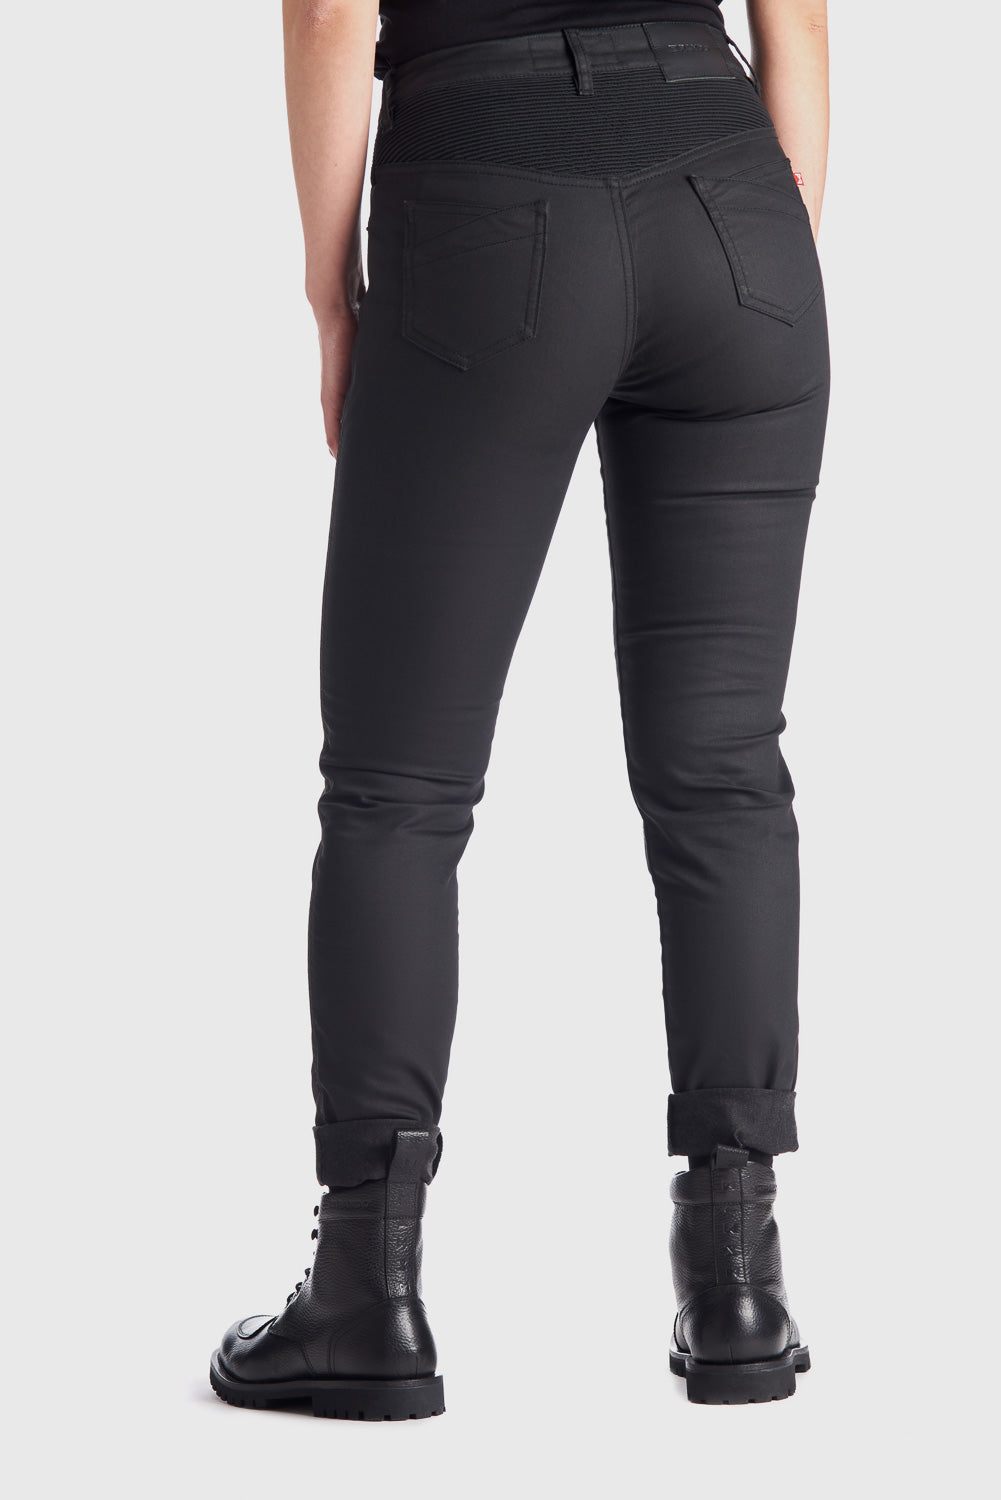 The back of woman's legs wearing slim-fit motorcycle jeans from Pando Moto 